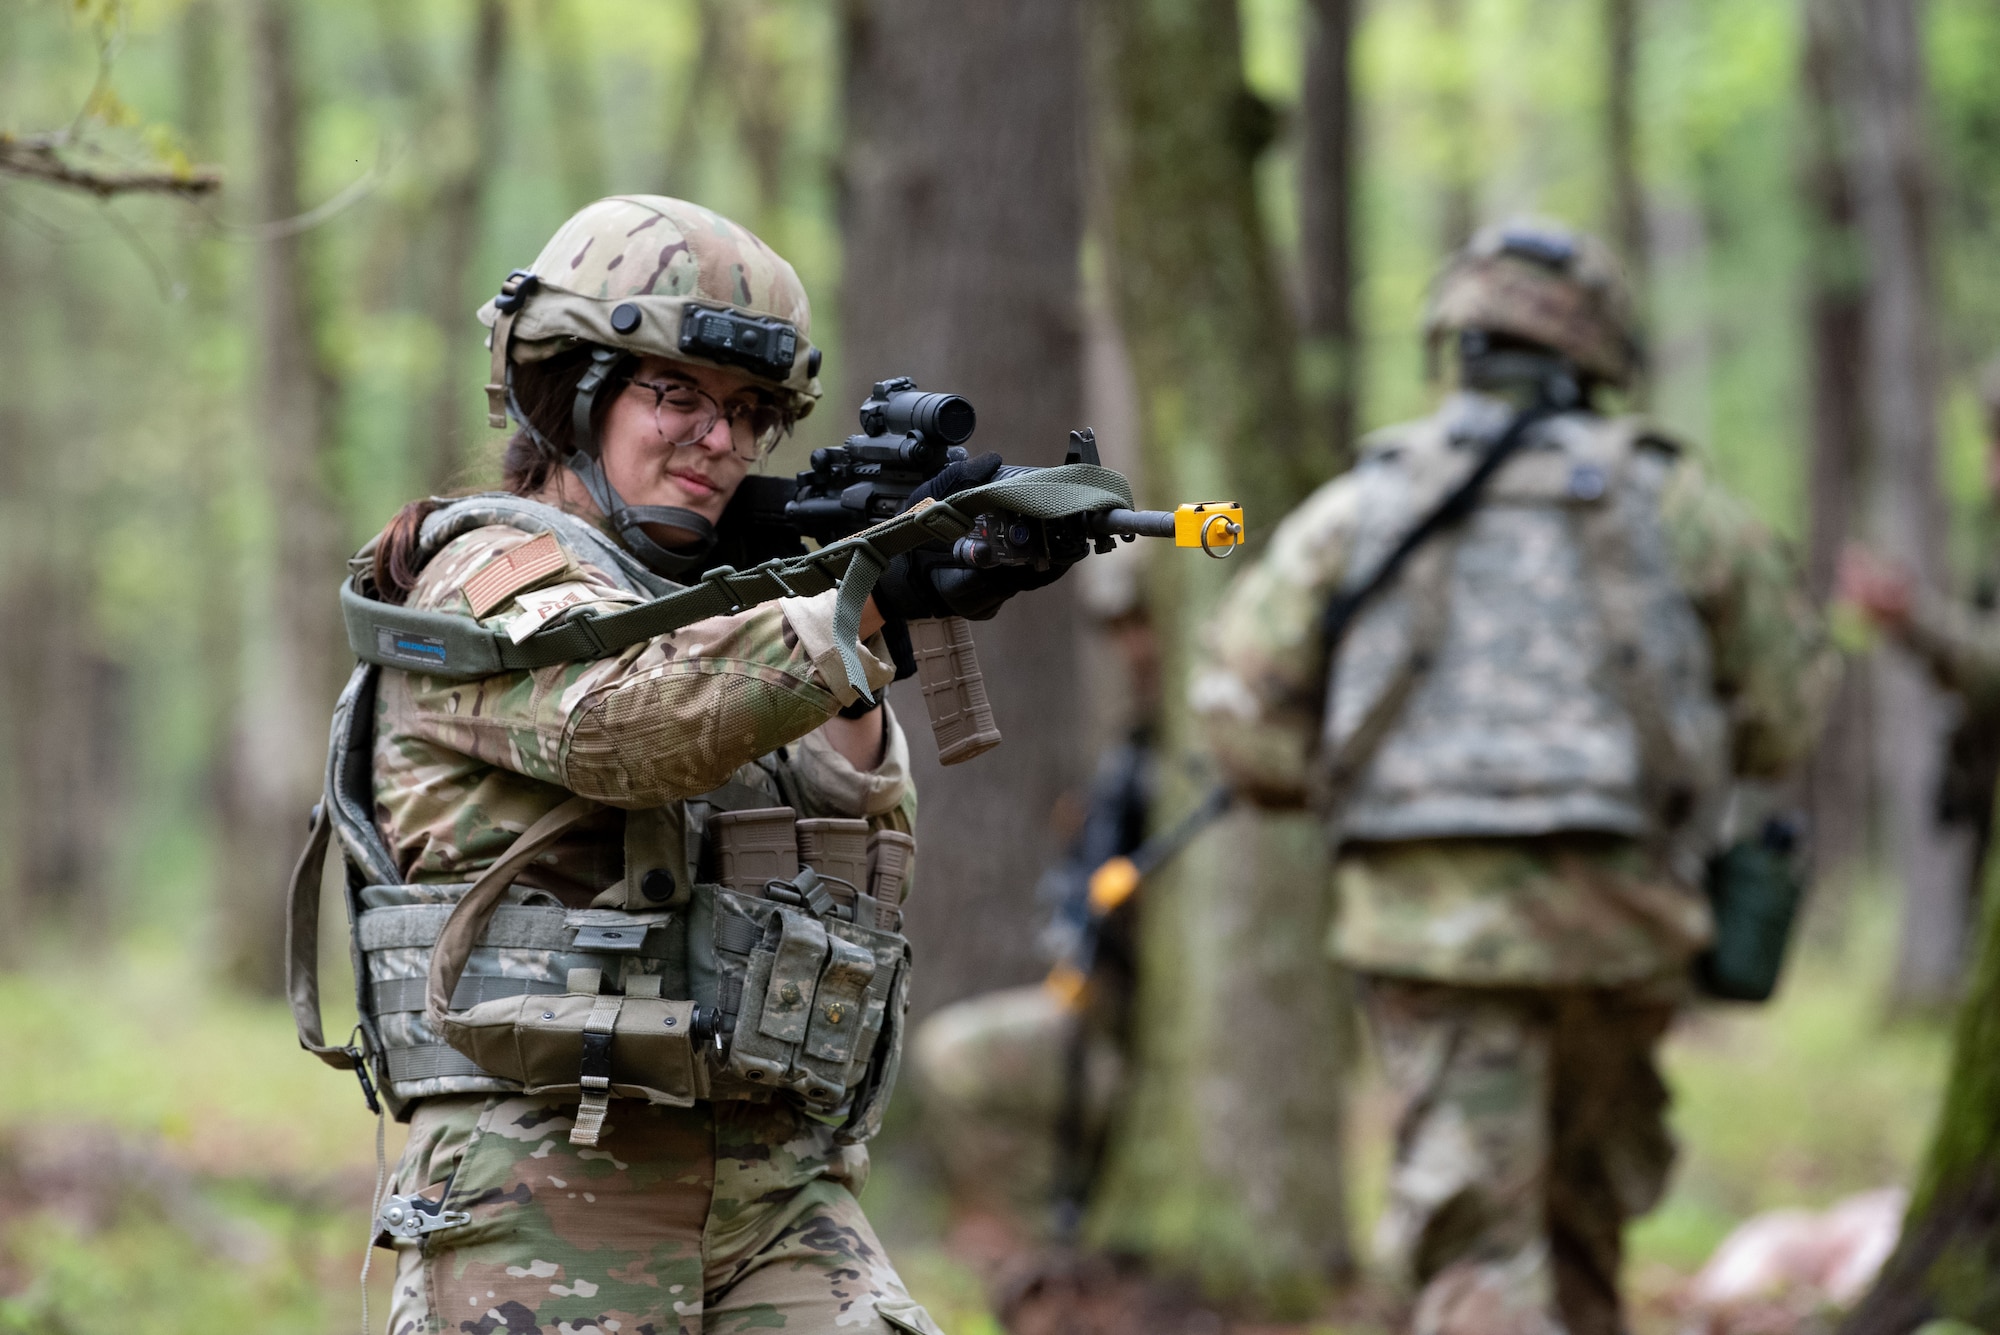 U.S. Air Force Tech. Sgt. Emylee Porter, a 157th Civil Engineer Squadron member, practices her ground combat skills in a simulated combat scenario during the 2024 Region One Prime Base Engineer Emergency Force (BEEF) Field Training Exercise on Fort Devens, Massachusetts, May 16, 2024.